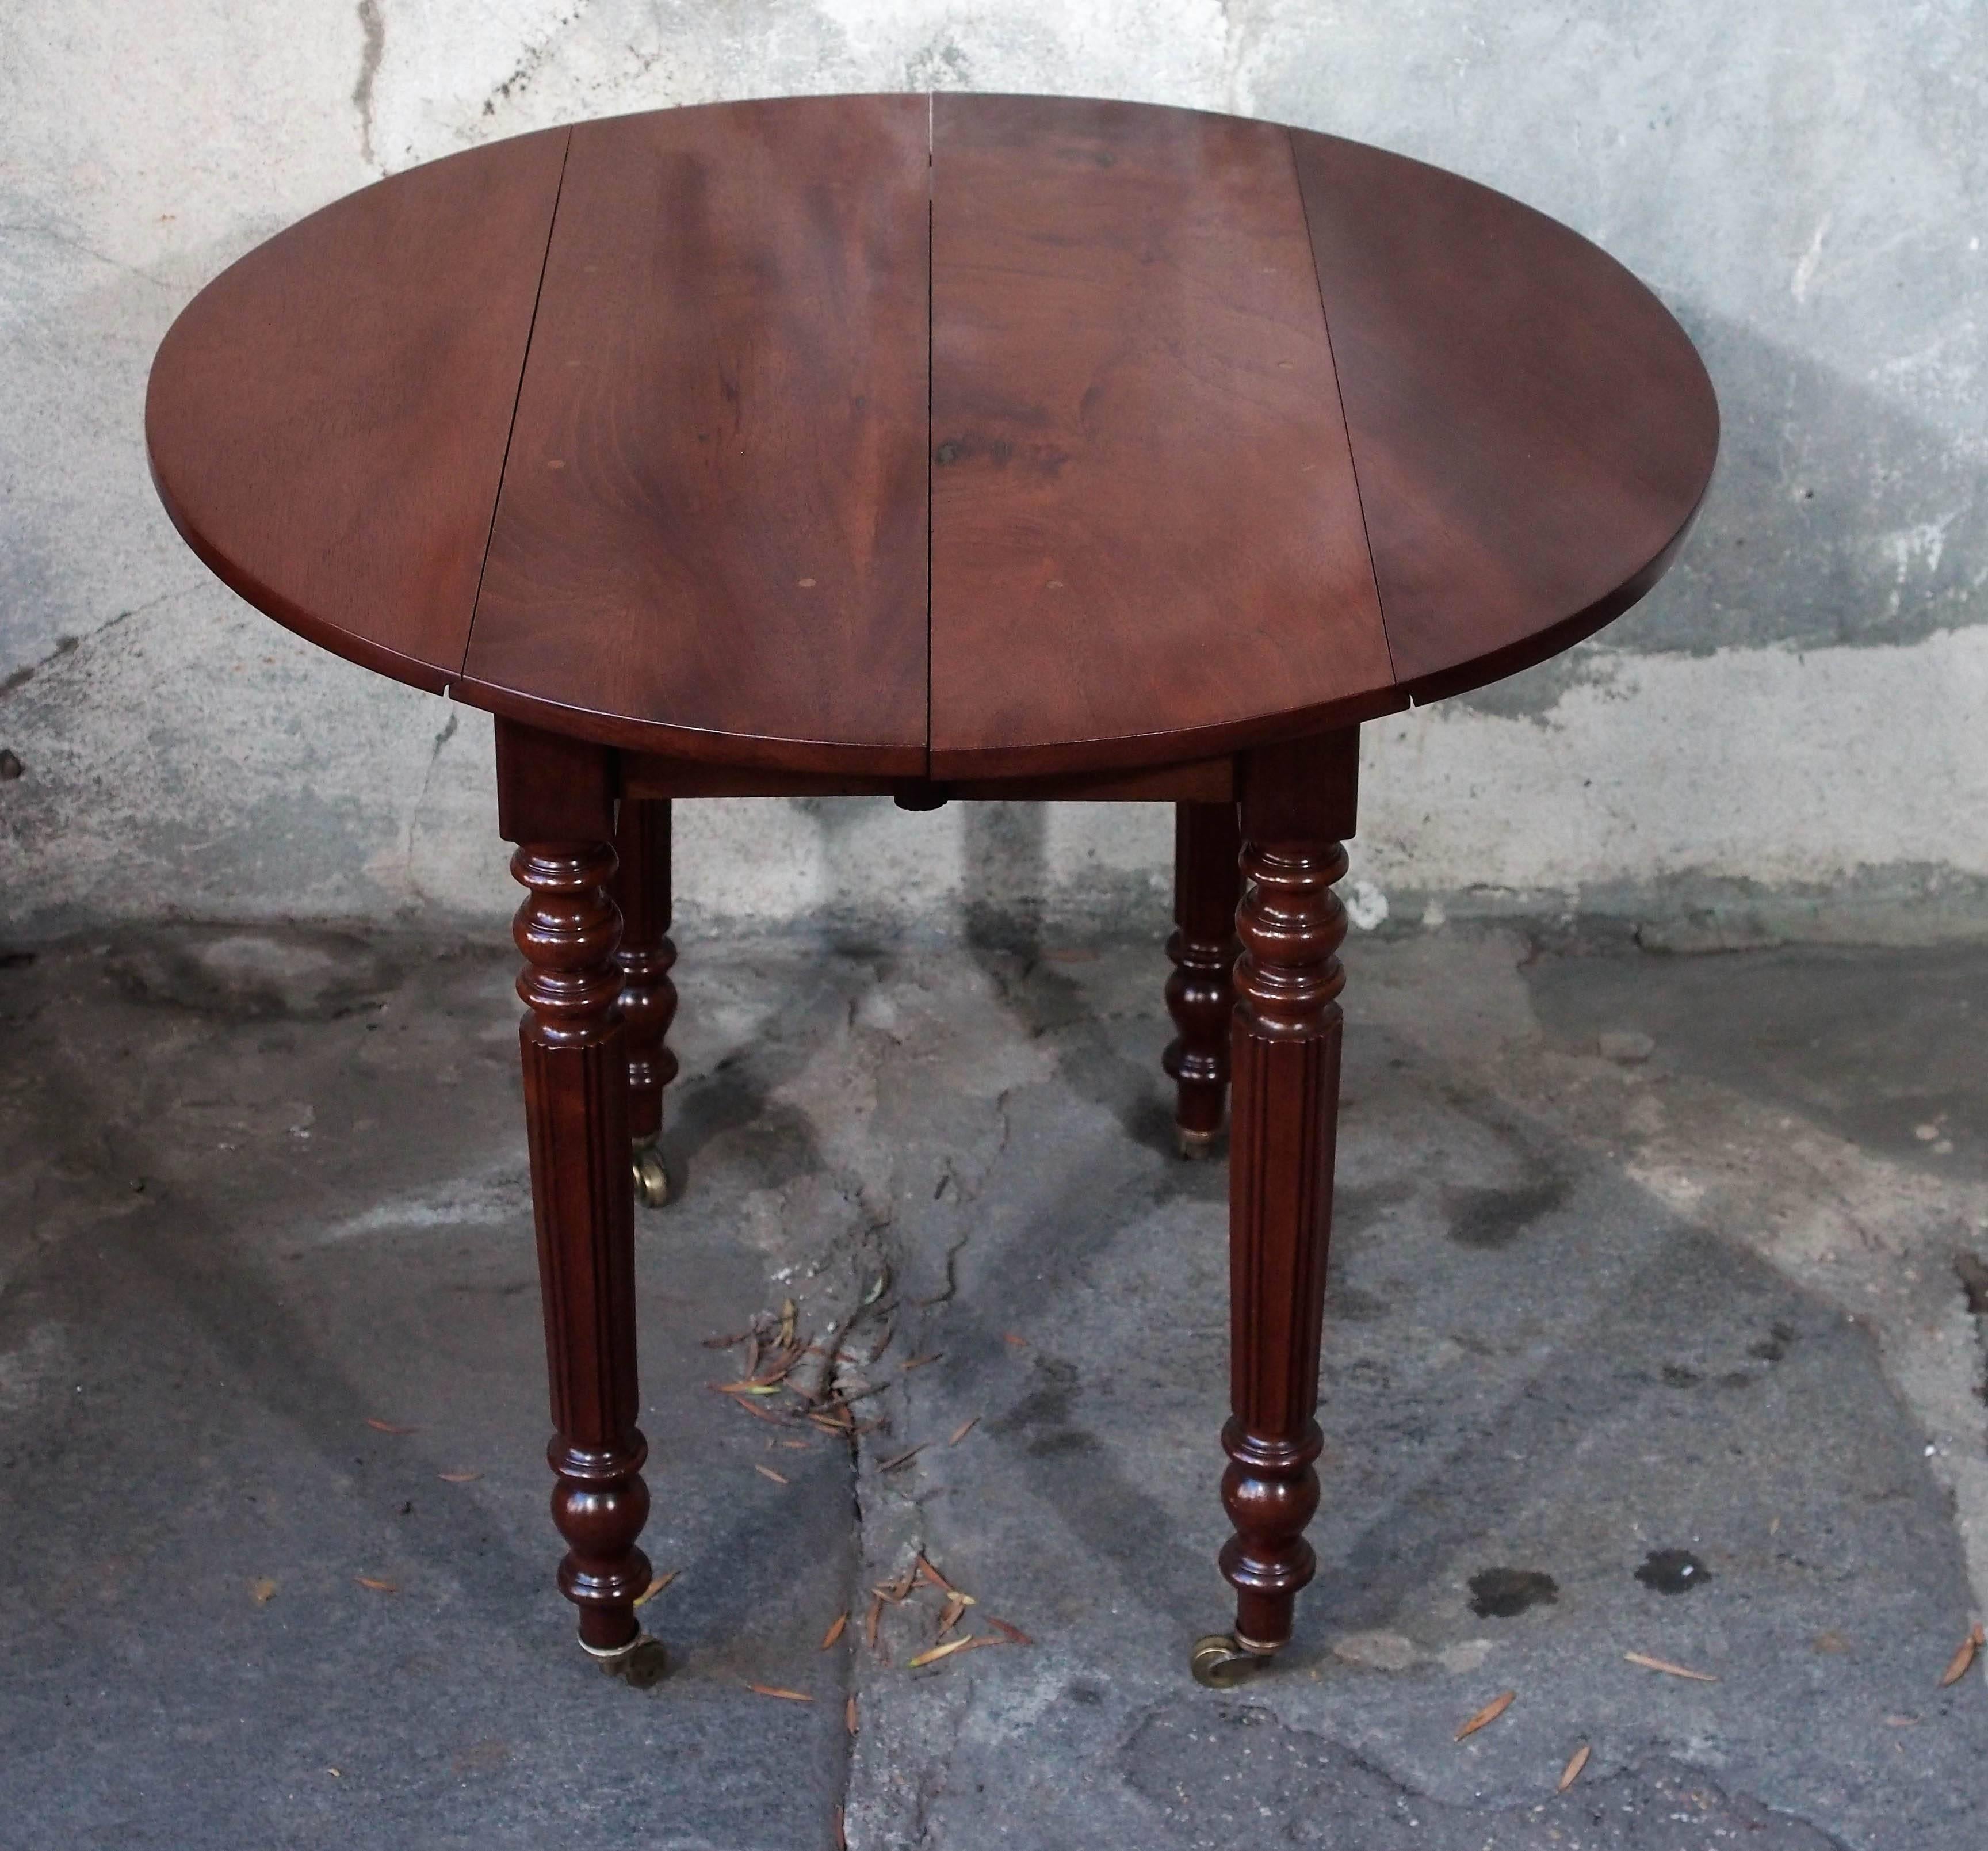 Charming Early 19th Century French Walnut Child's Dining Table with One Leaf 3